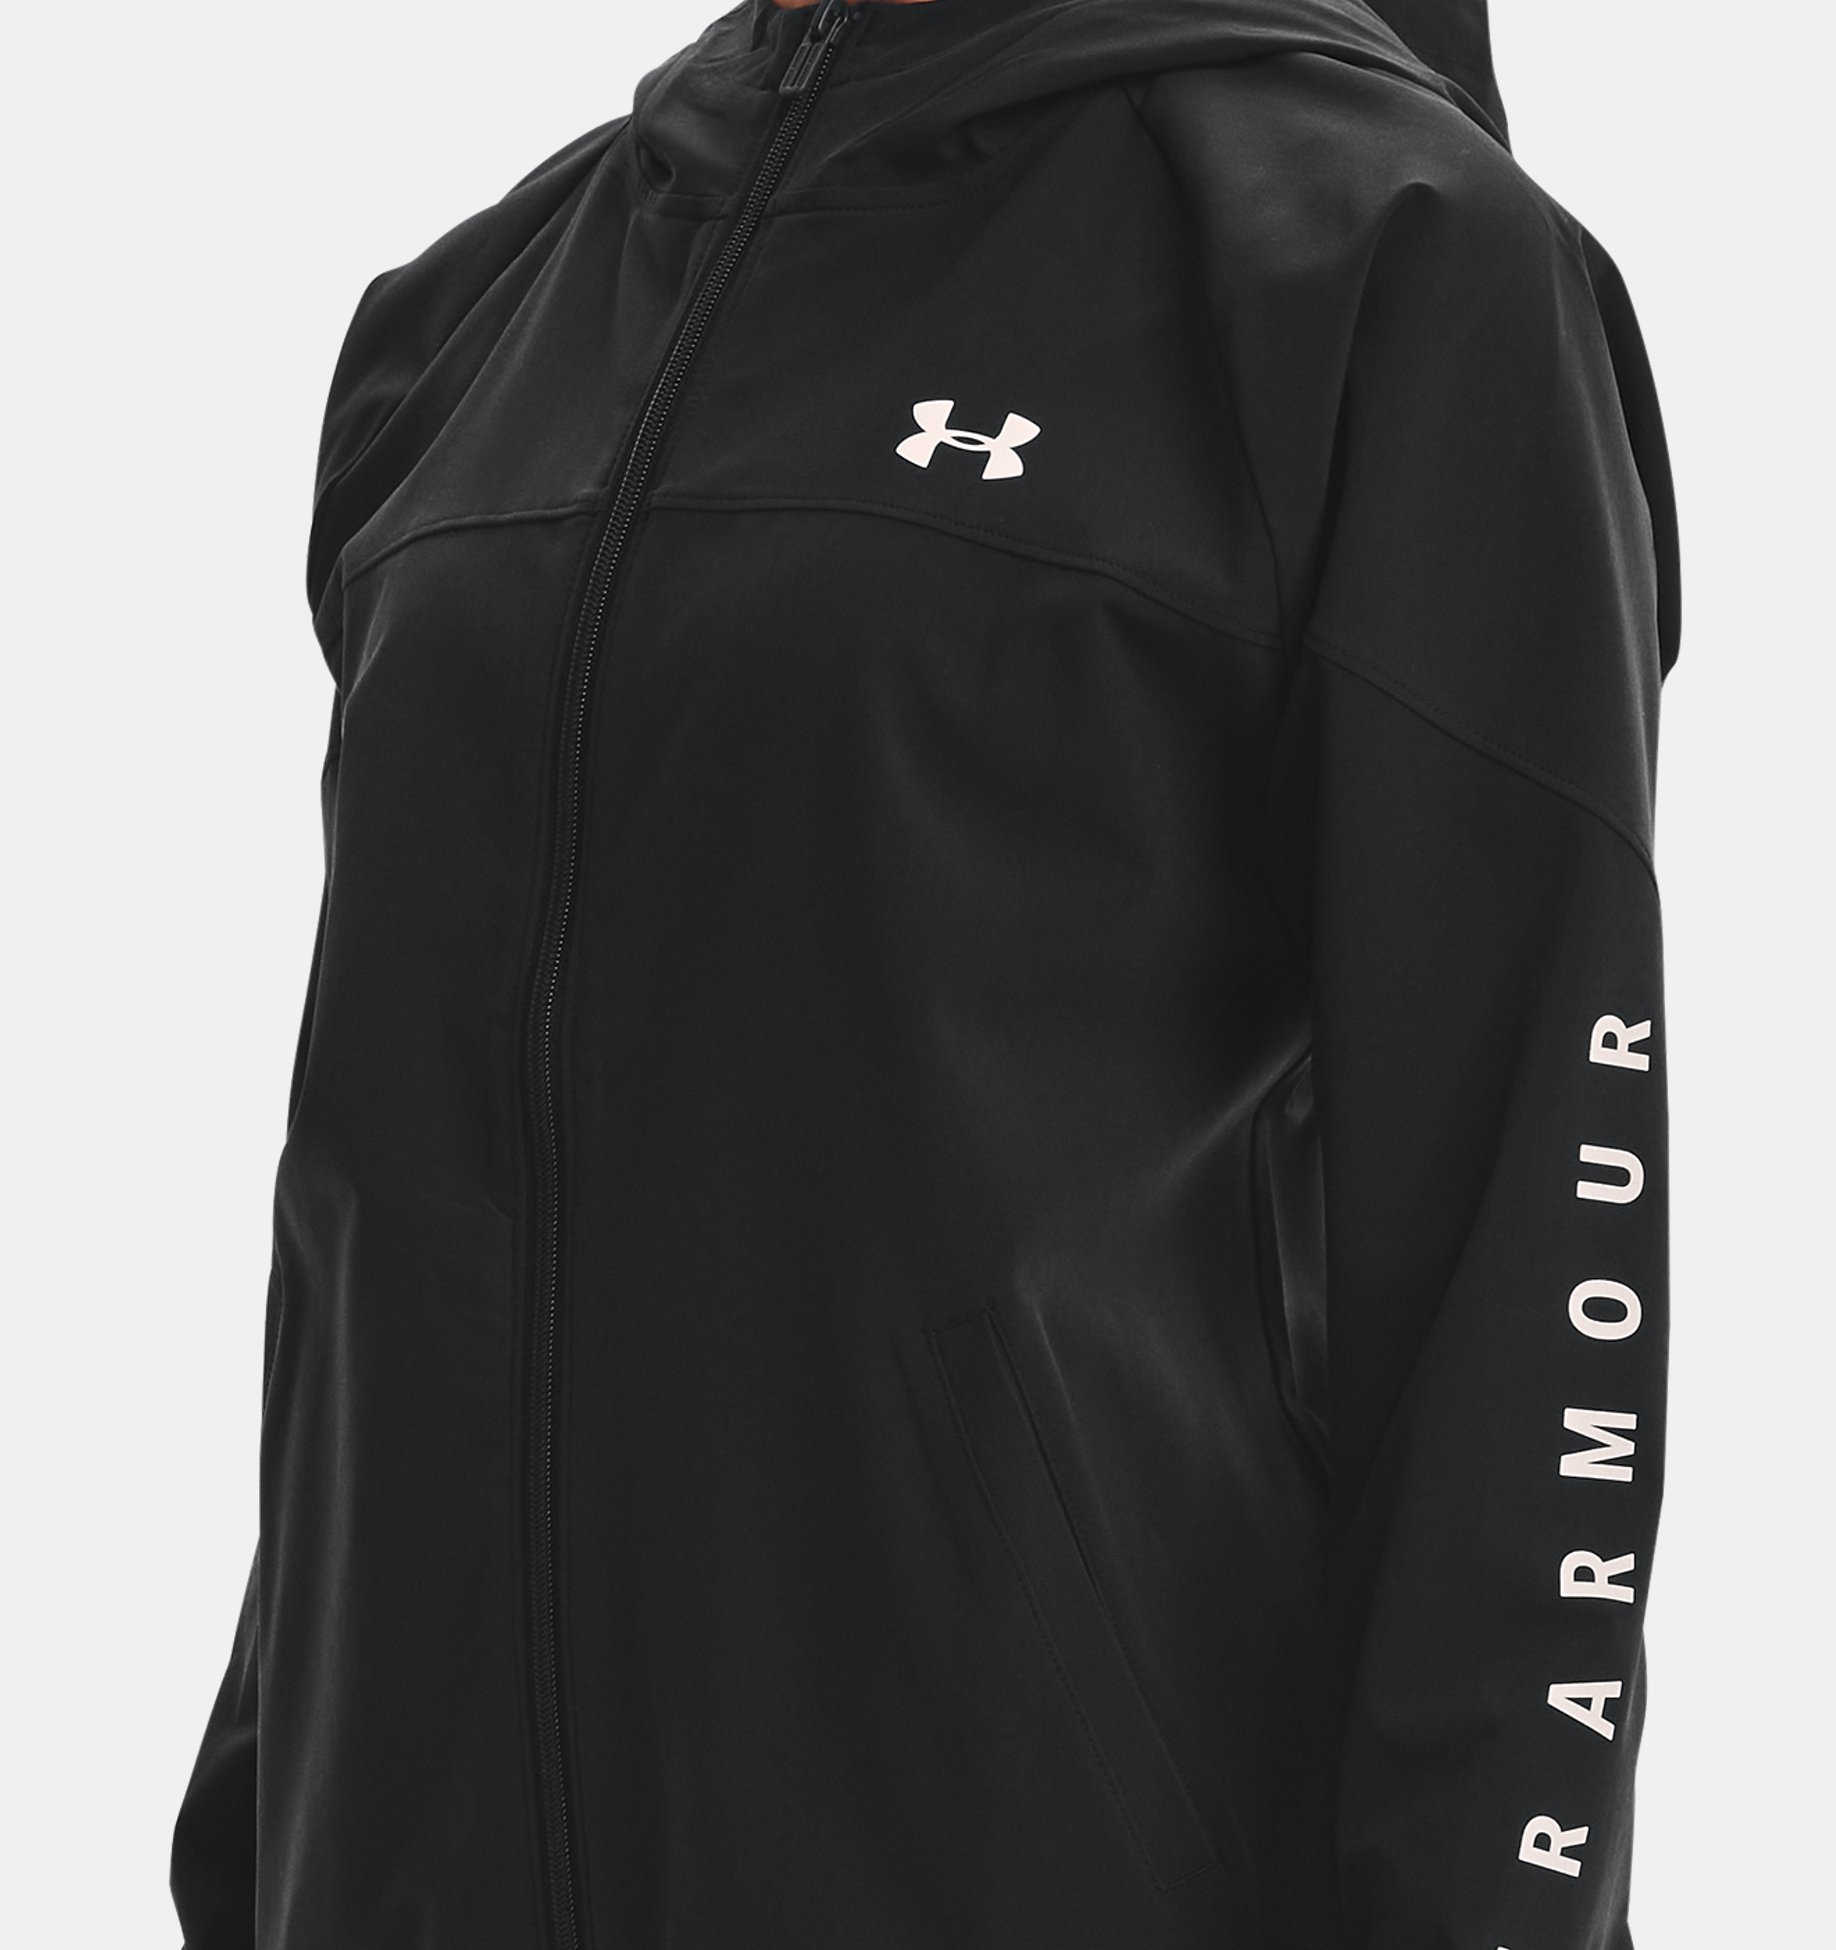 https://underarmour.scene7.com/is/image/Underarmour/V5-1351794-001_FC?rp=standard-0pad|pdpZoomDesktop&scl=0.72&fmt=jpg&qlt=85&resMode=sharp2&cache=on,on&bgc=f0f0f0&wid=1836&hei=1950&size=1500,1500